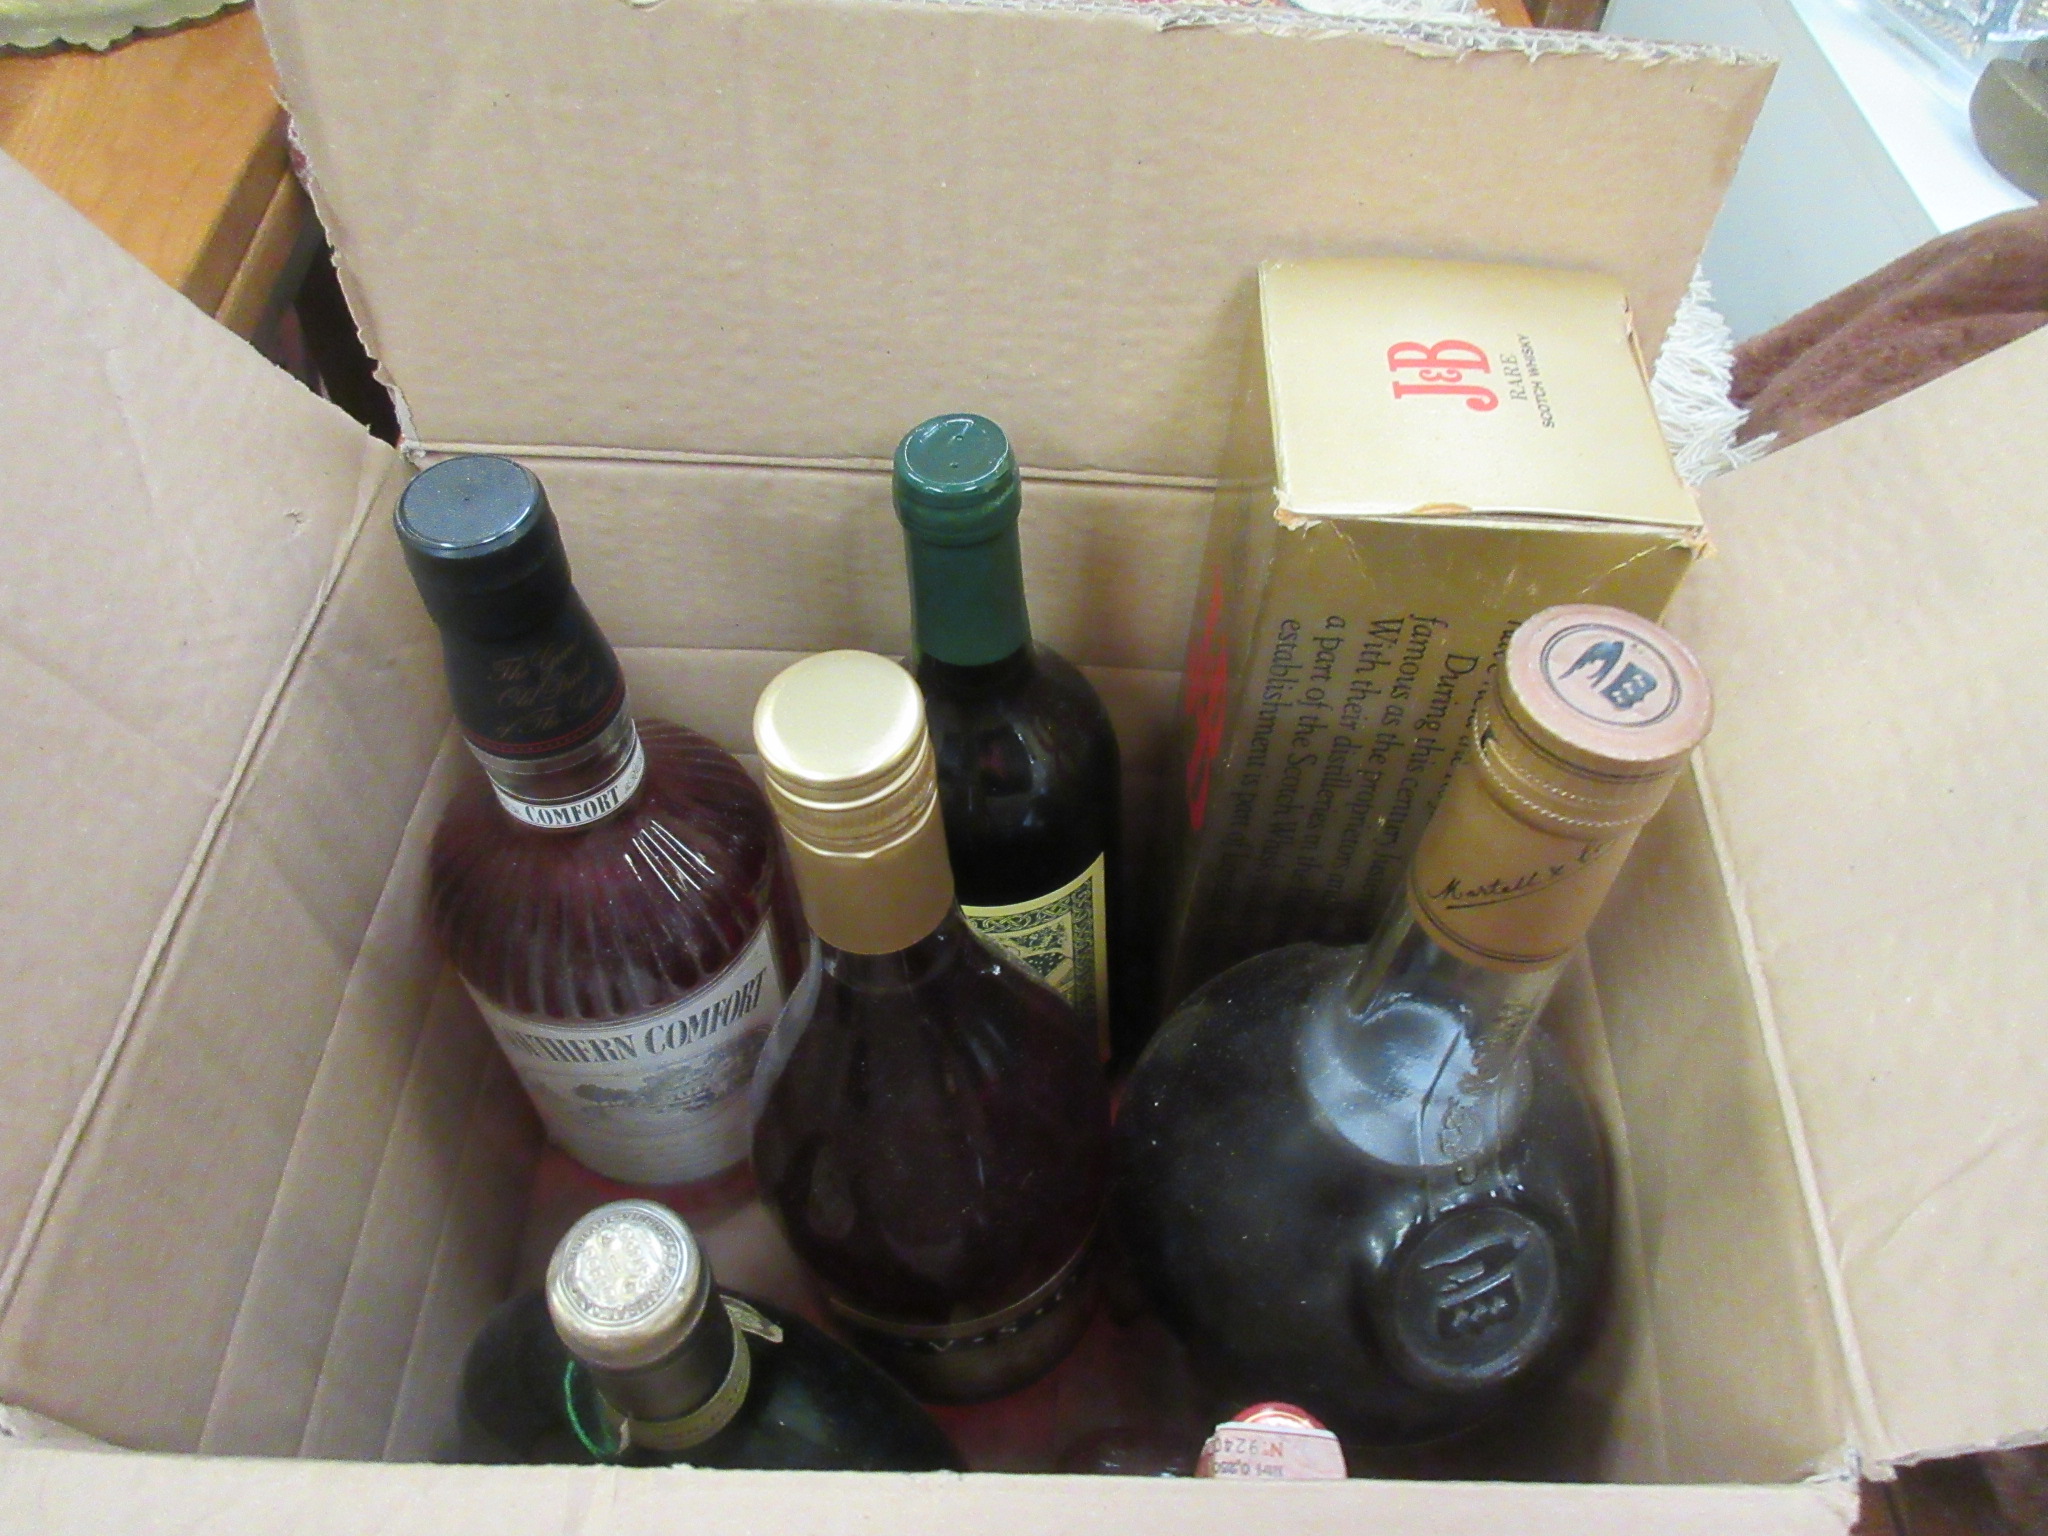 BOX CONTAINING BOTTLES OF ALCOHOL INCLUDING J&B BOXED RARE SCOTCH WHISKY, 1.5LTR BOTTLE OF MARTELL